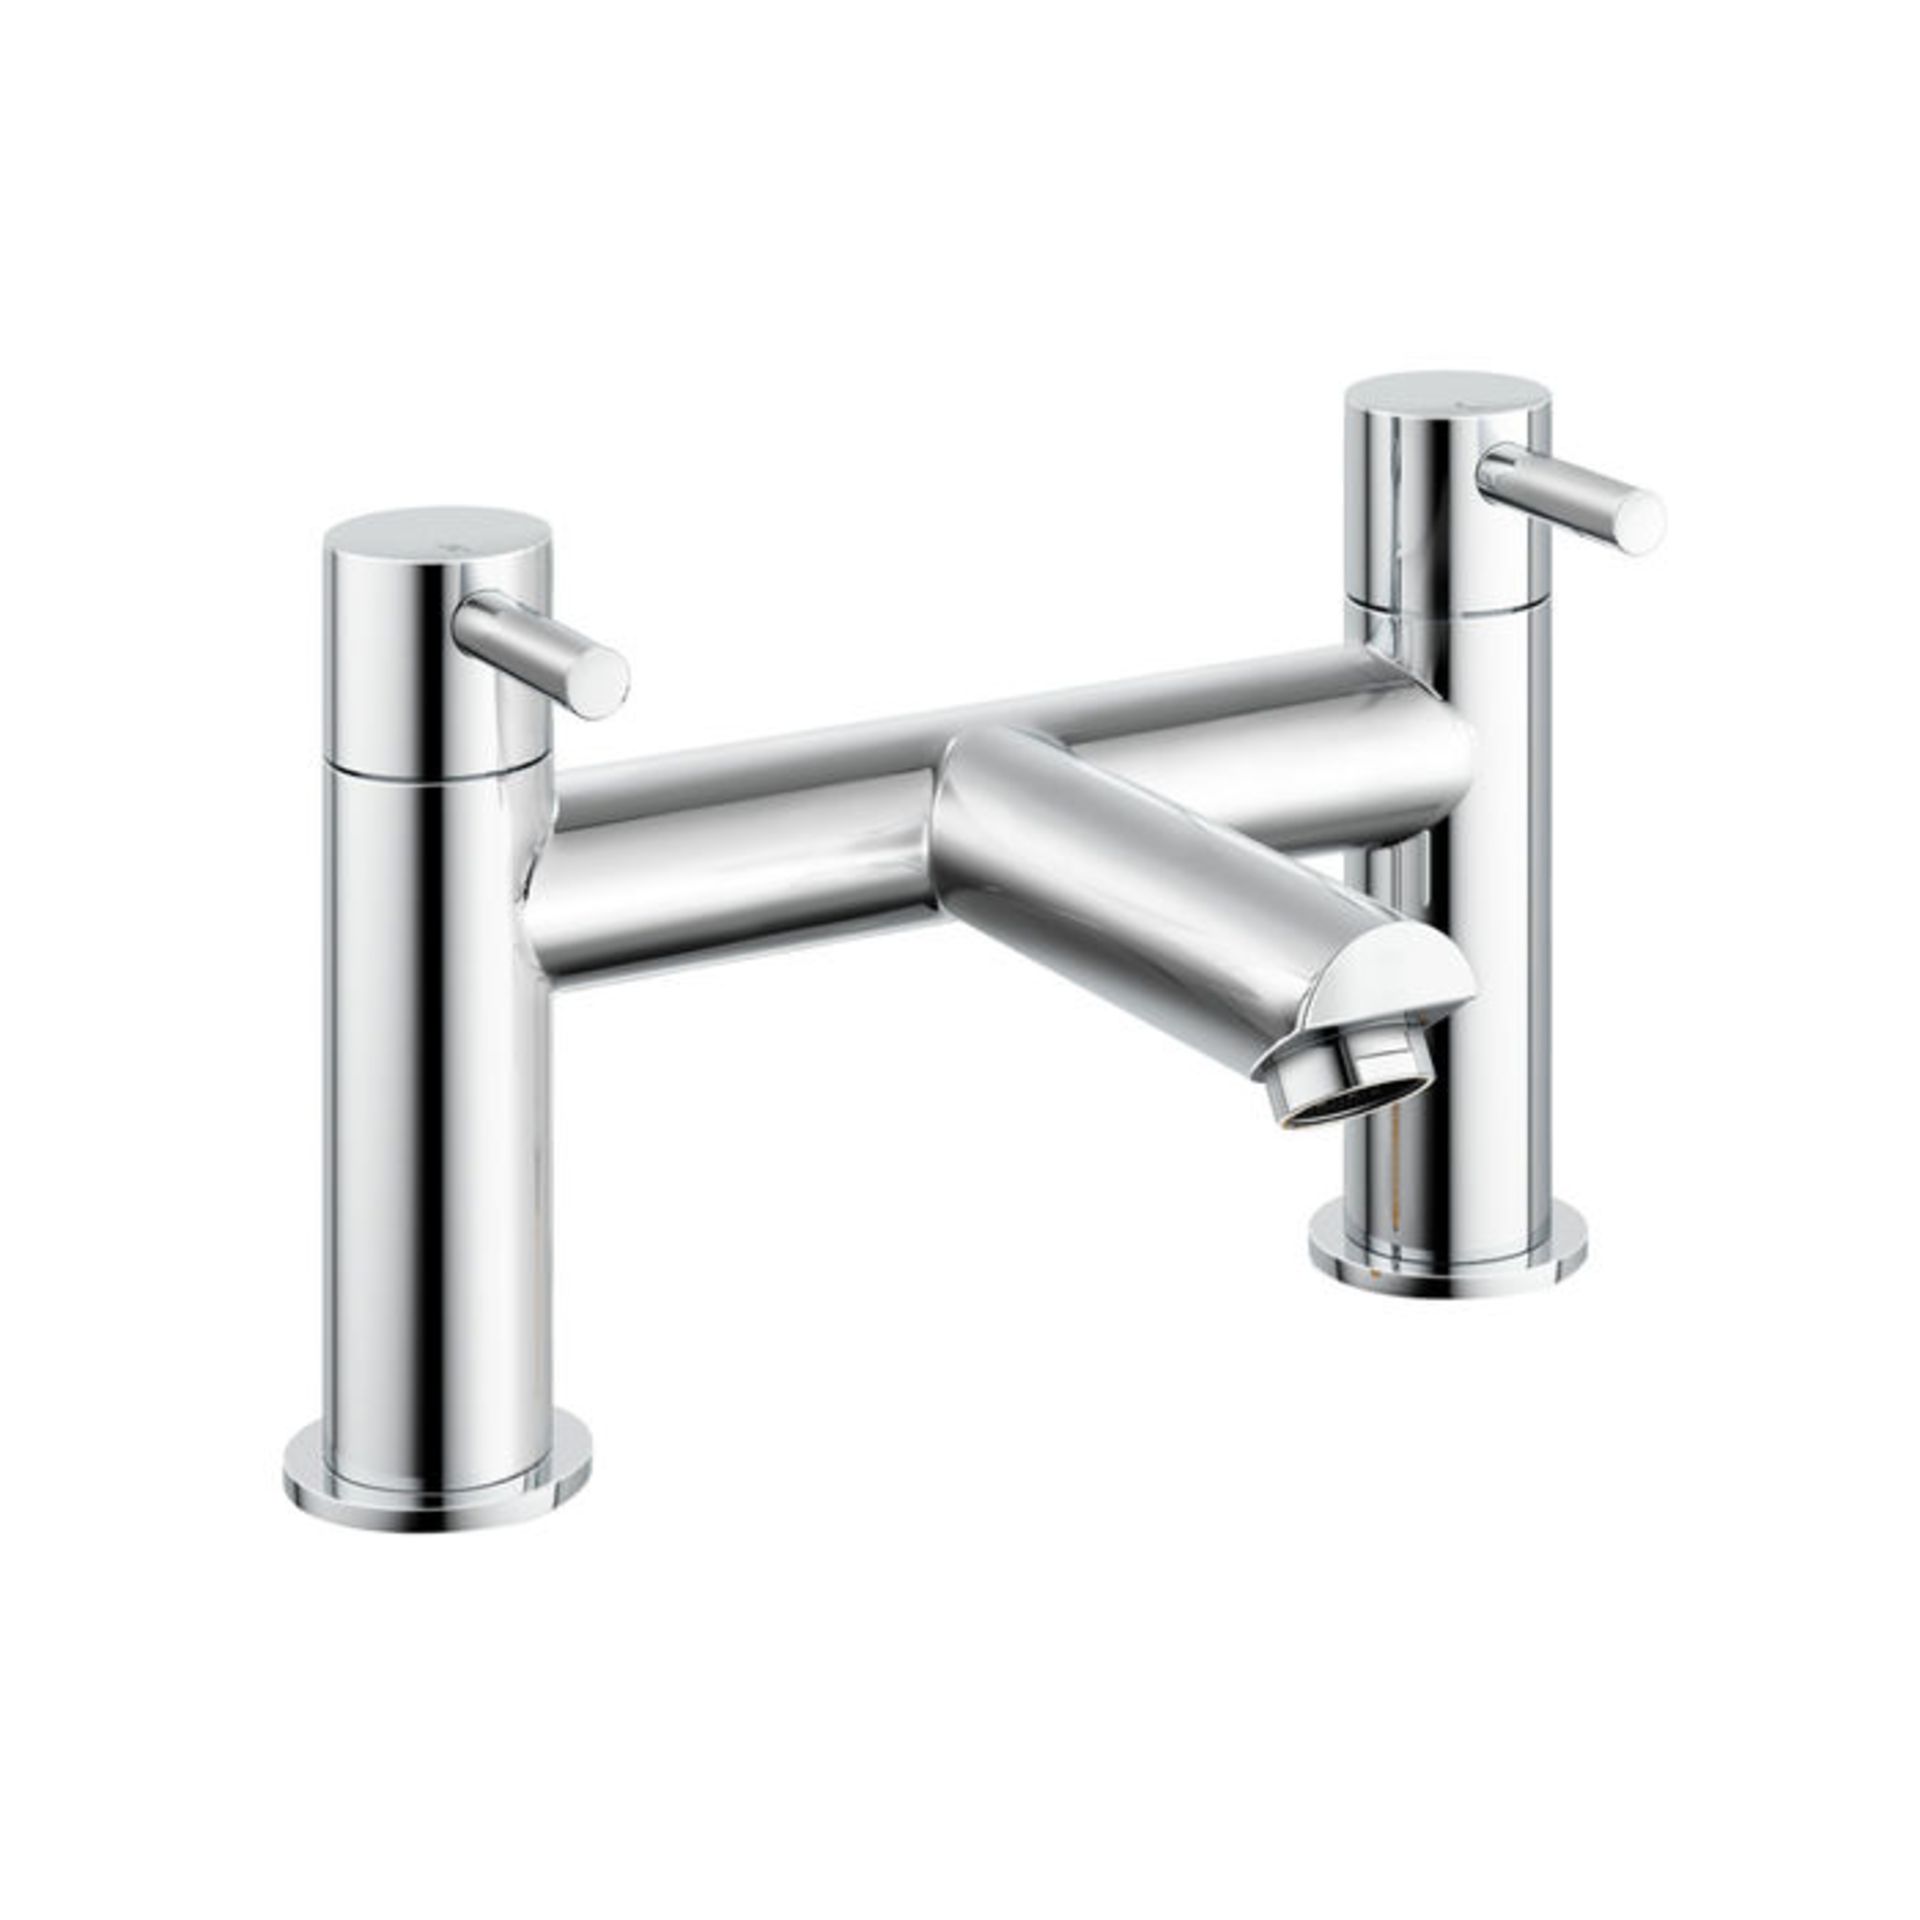 (PA82) Gladstone II Bath Filler Mixer Tap Chrome Plated Solid Brass 1/4 turn solid brass valve - Image 2 of 2